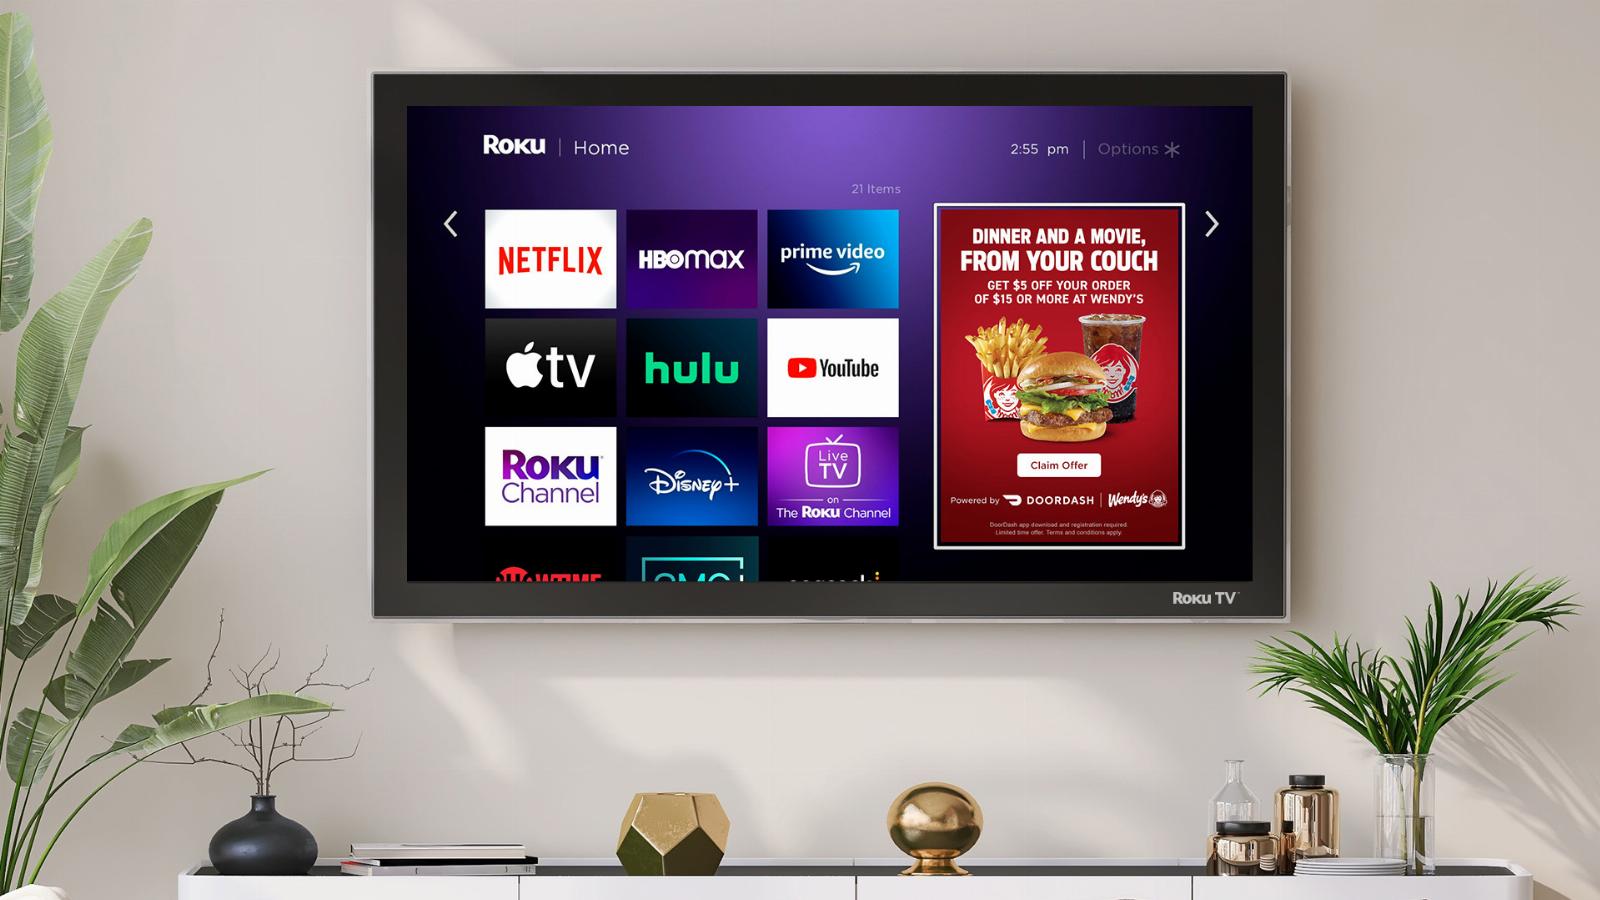 Roku partners with DoorDash to give users 6 months of free DashPass and shoppable ads